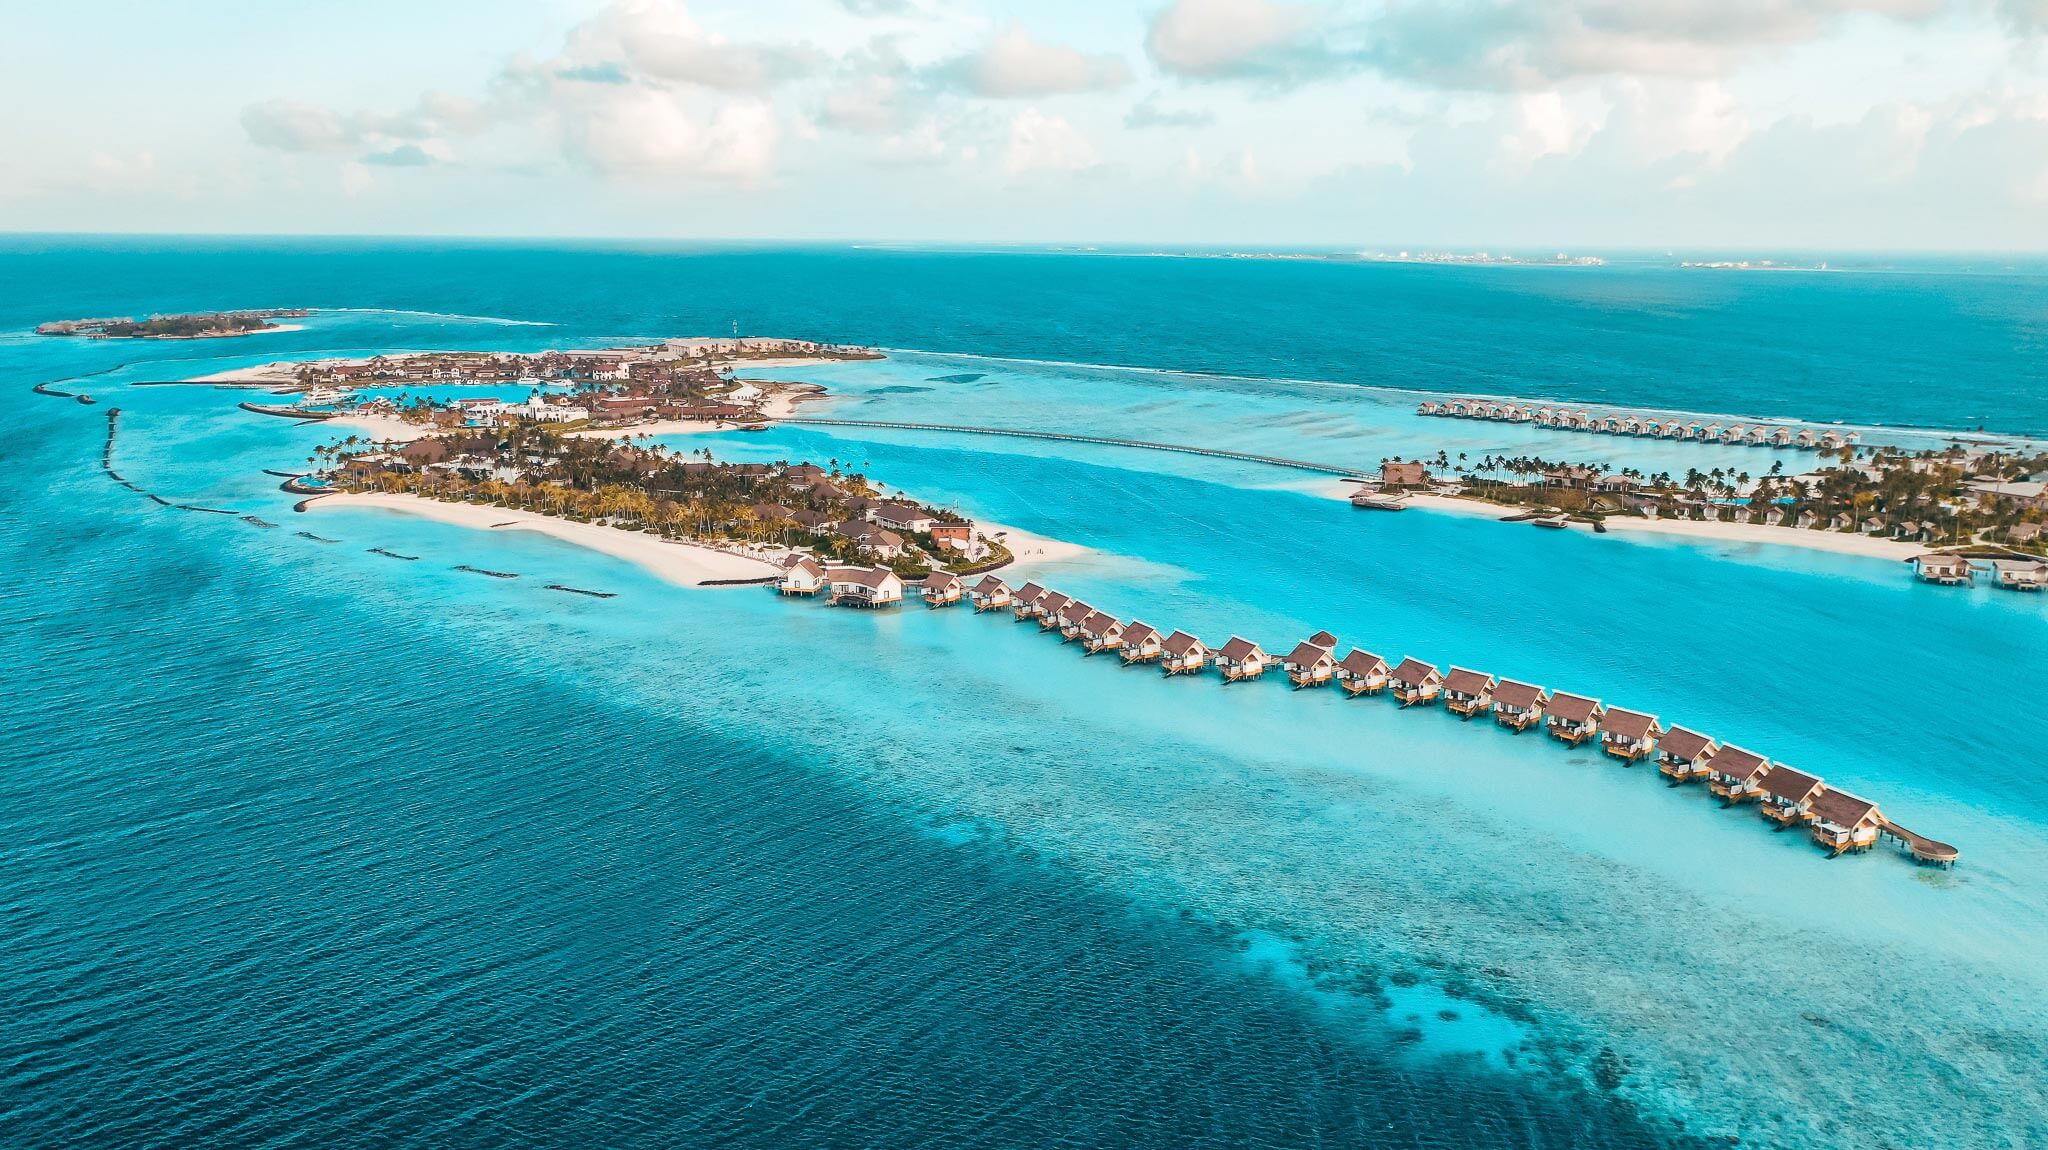 Your Maldivian experience